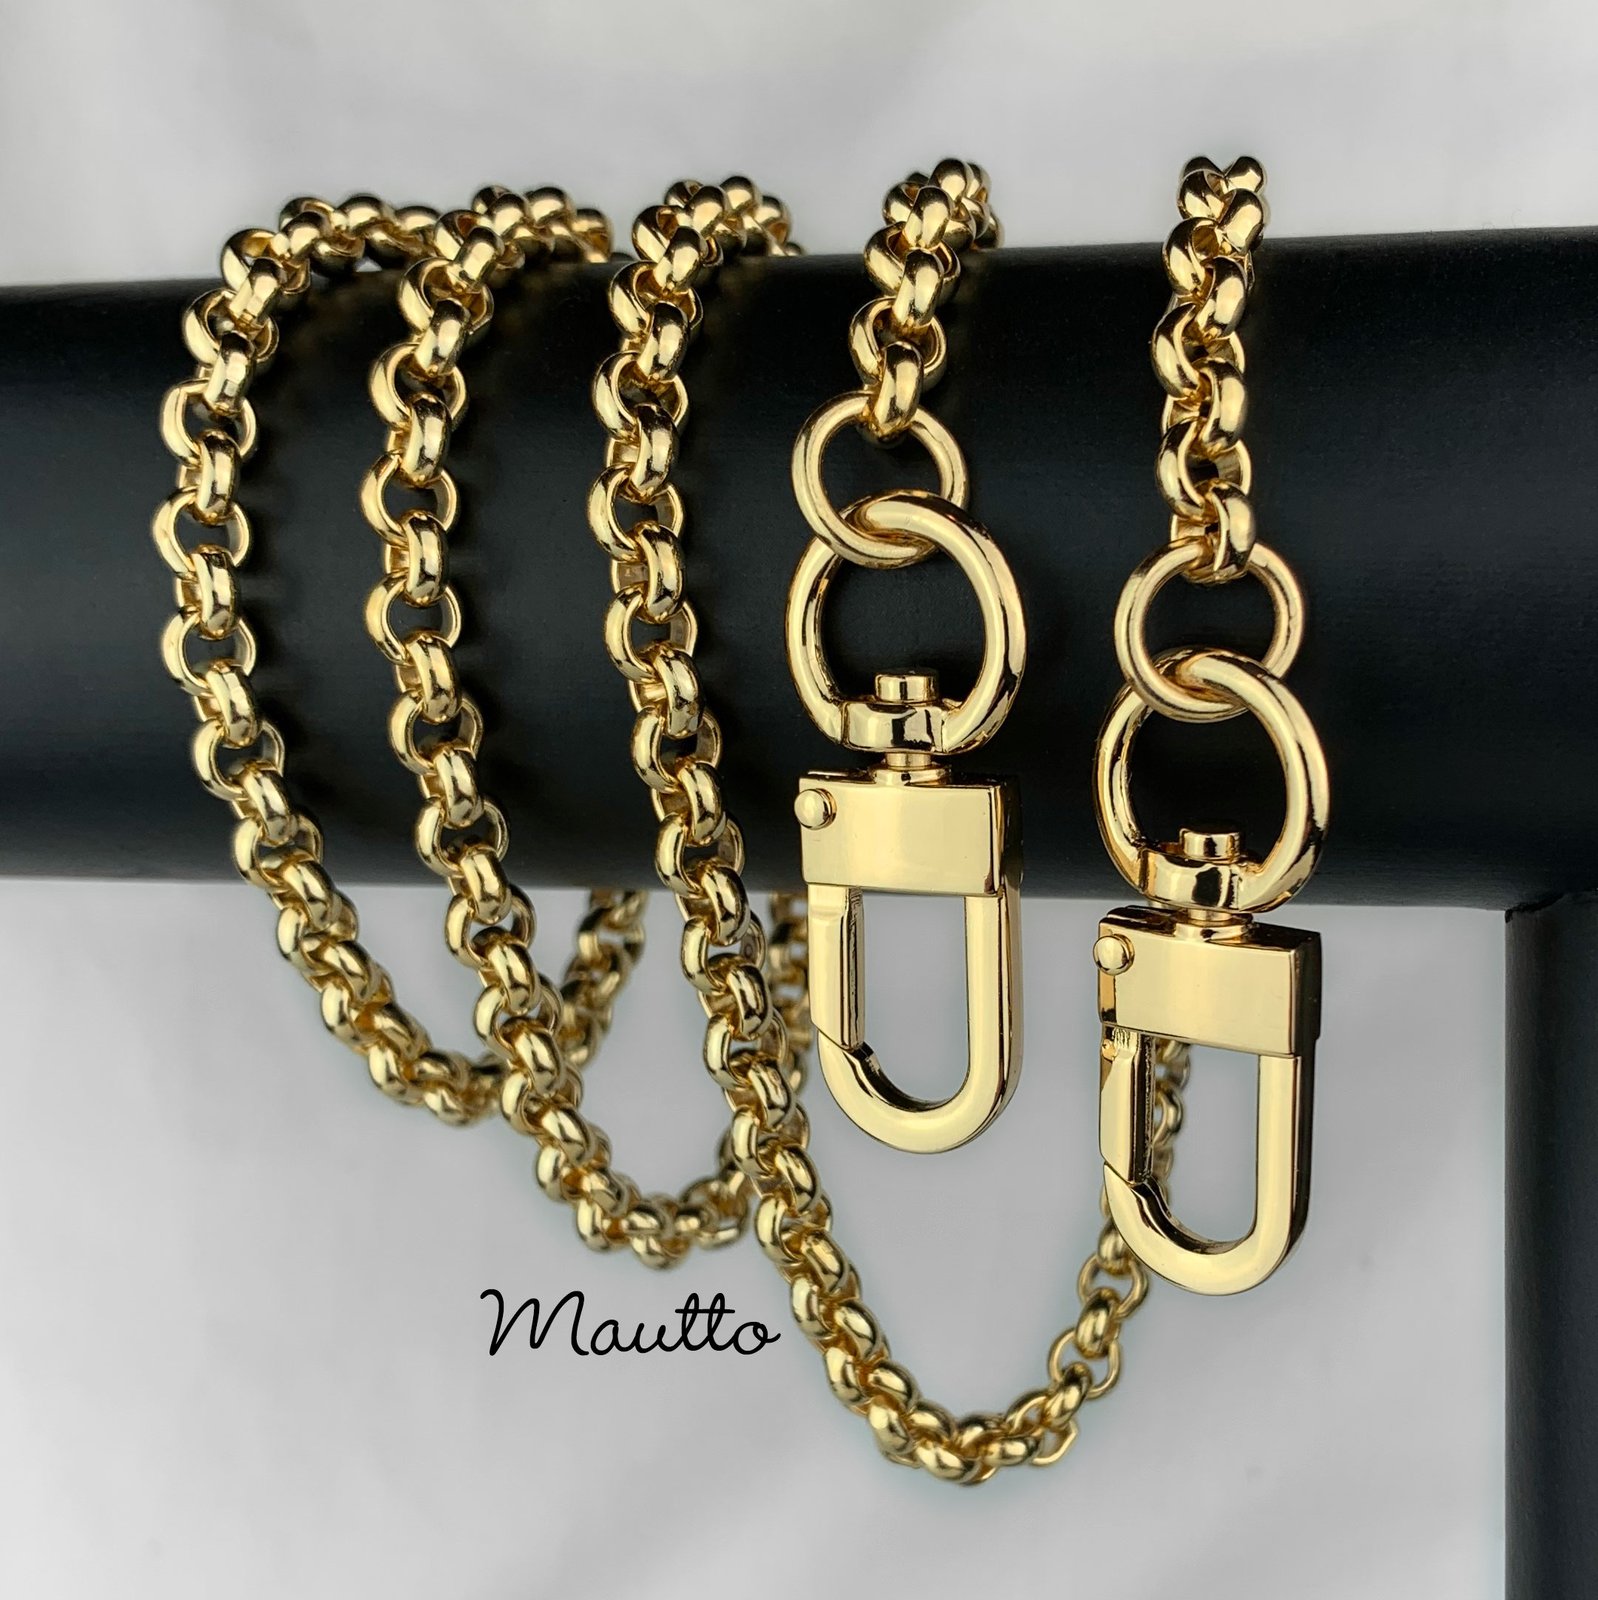 long gold chain for purse